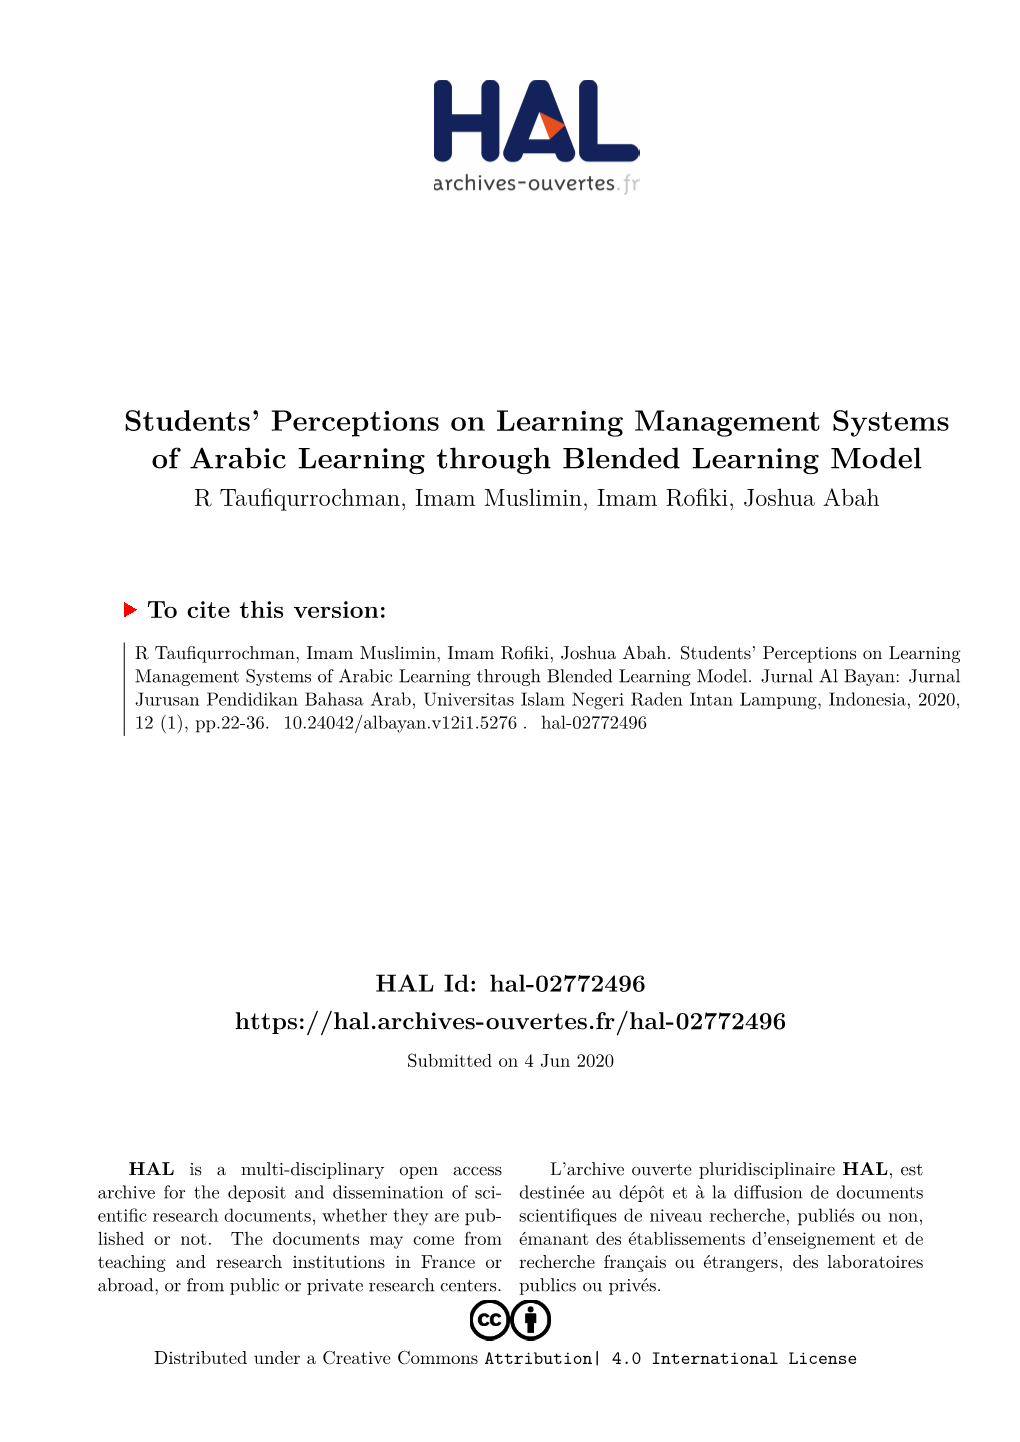 Students' Perceptions on Learning Management Systems of Arabic